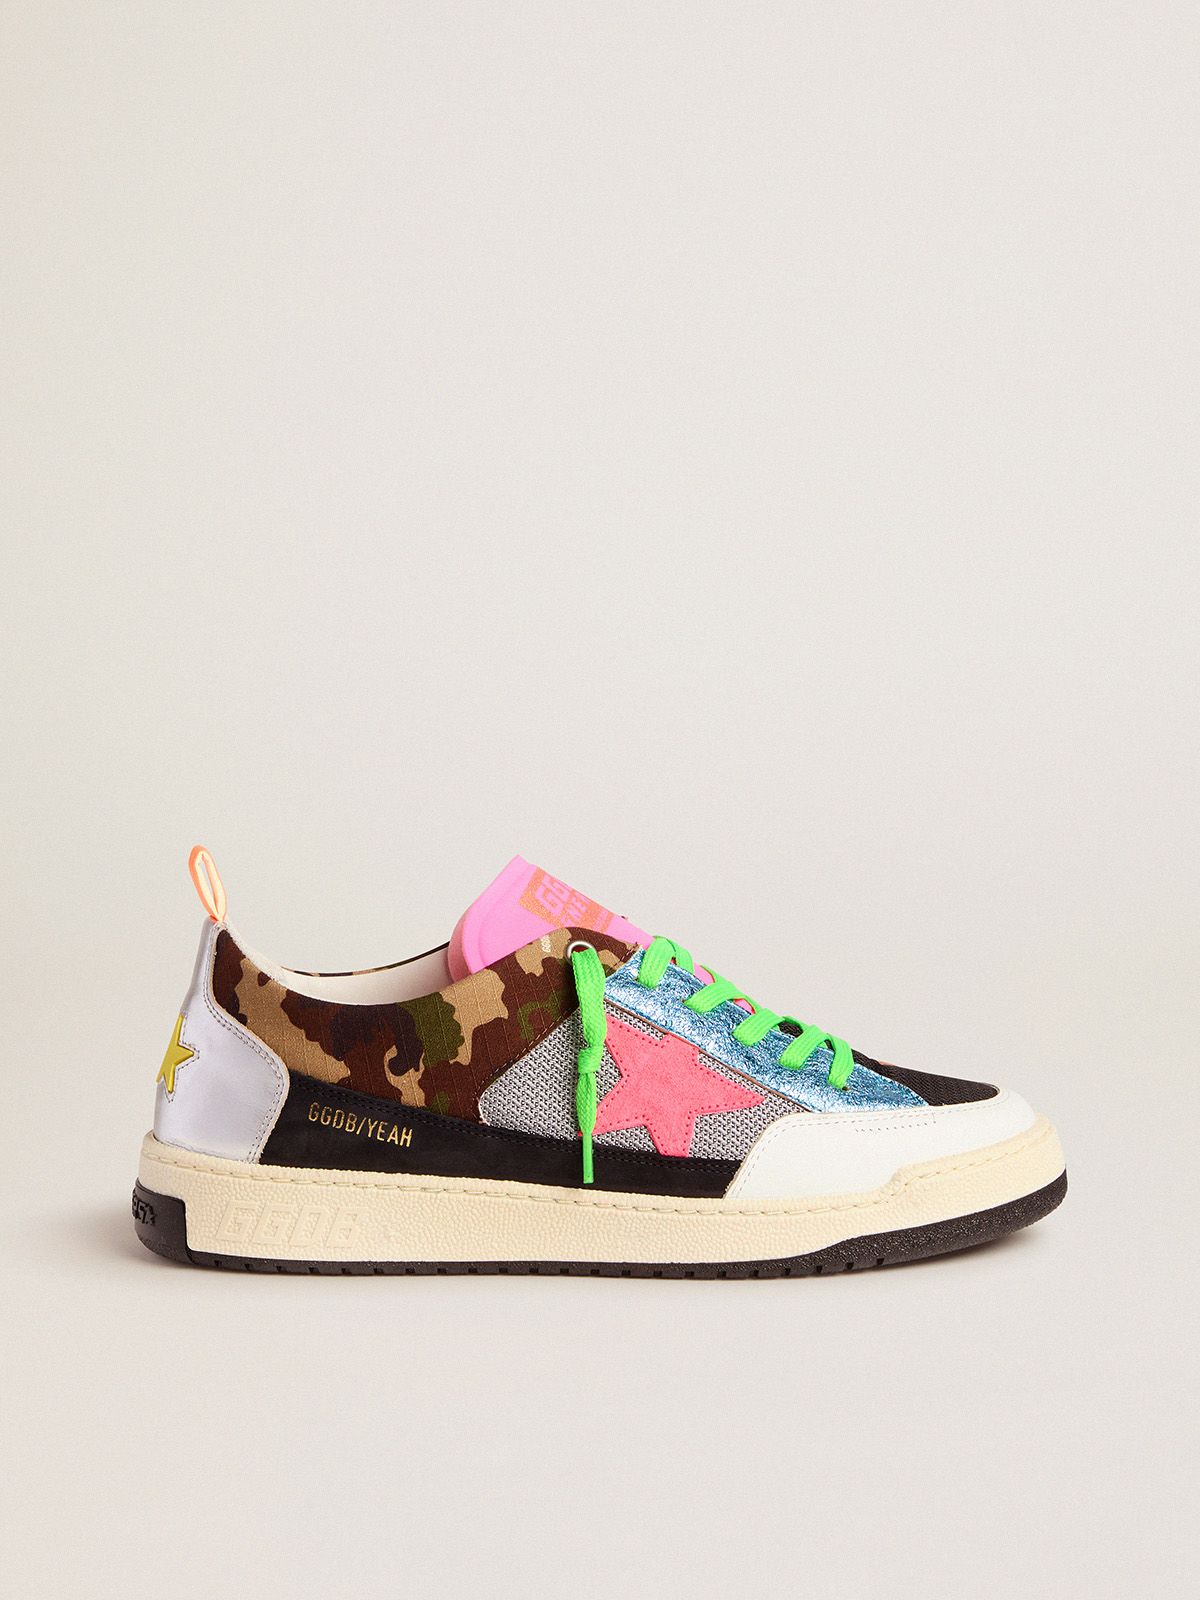 Men’s camouflage Yeah sneakers with fuchsia star | 